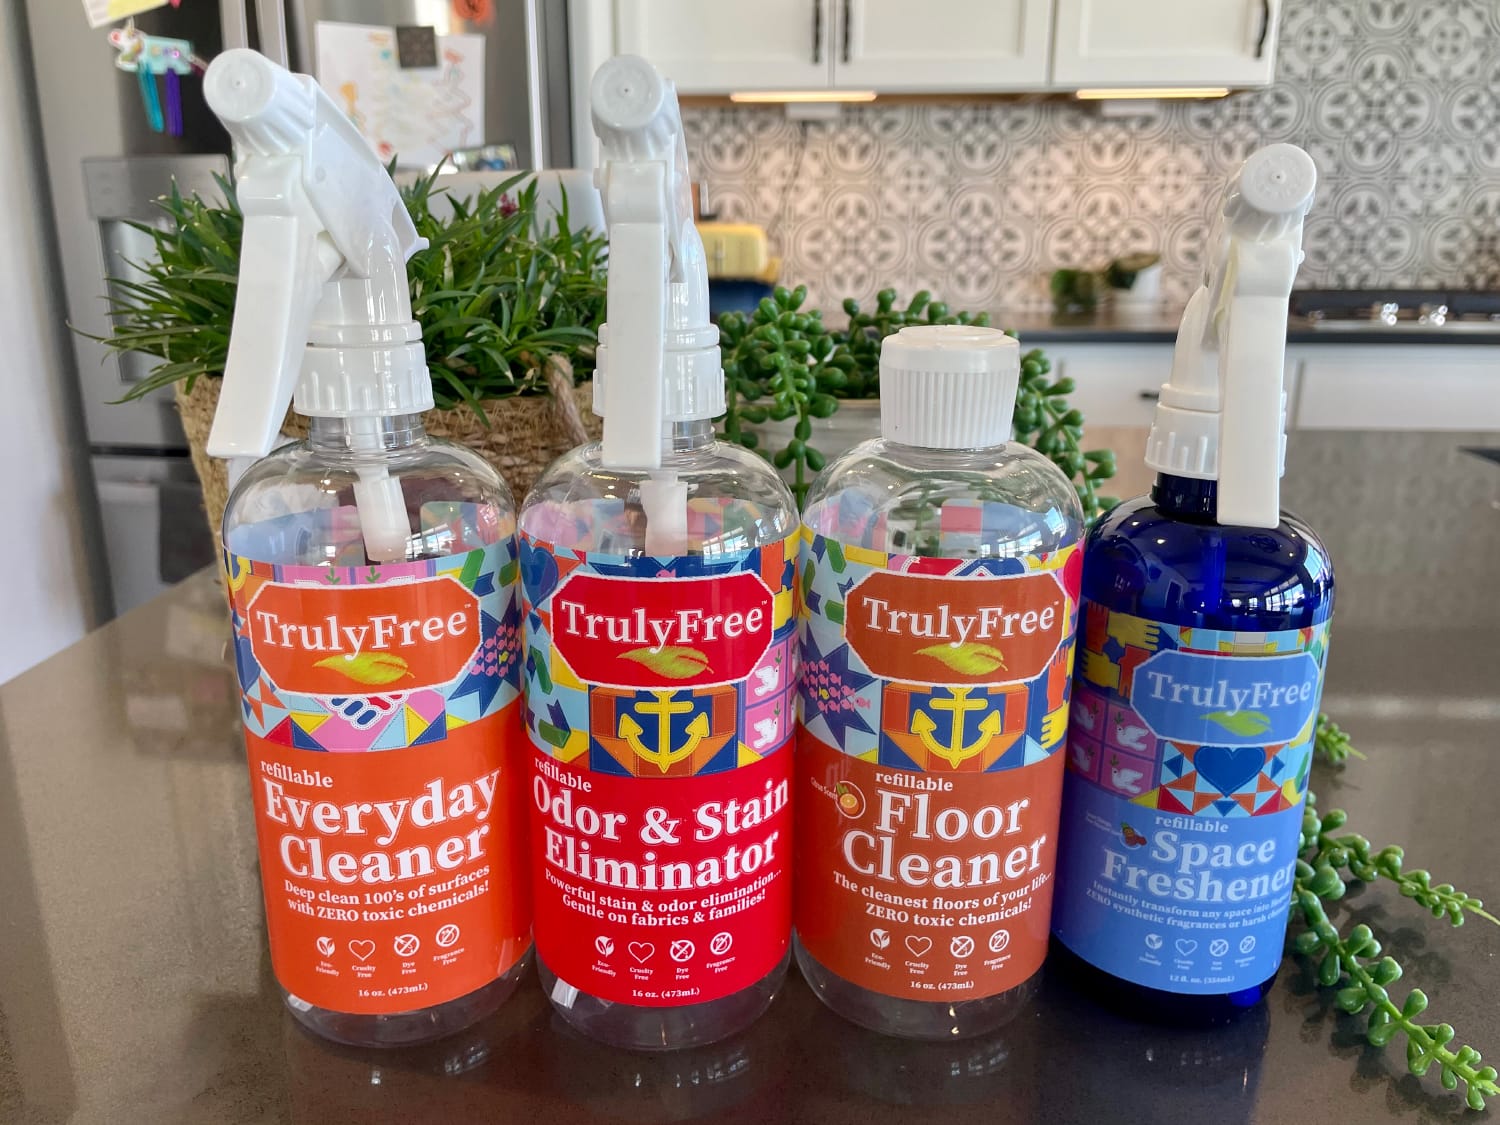 Truly Free Home Pet Cleaning Kit - product bottle on the counter